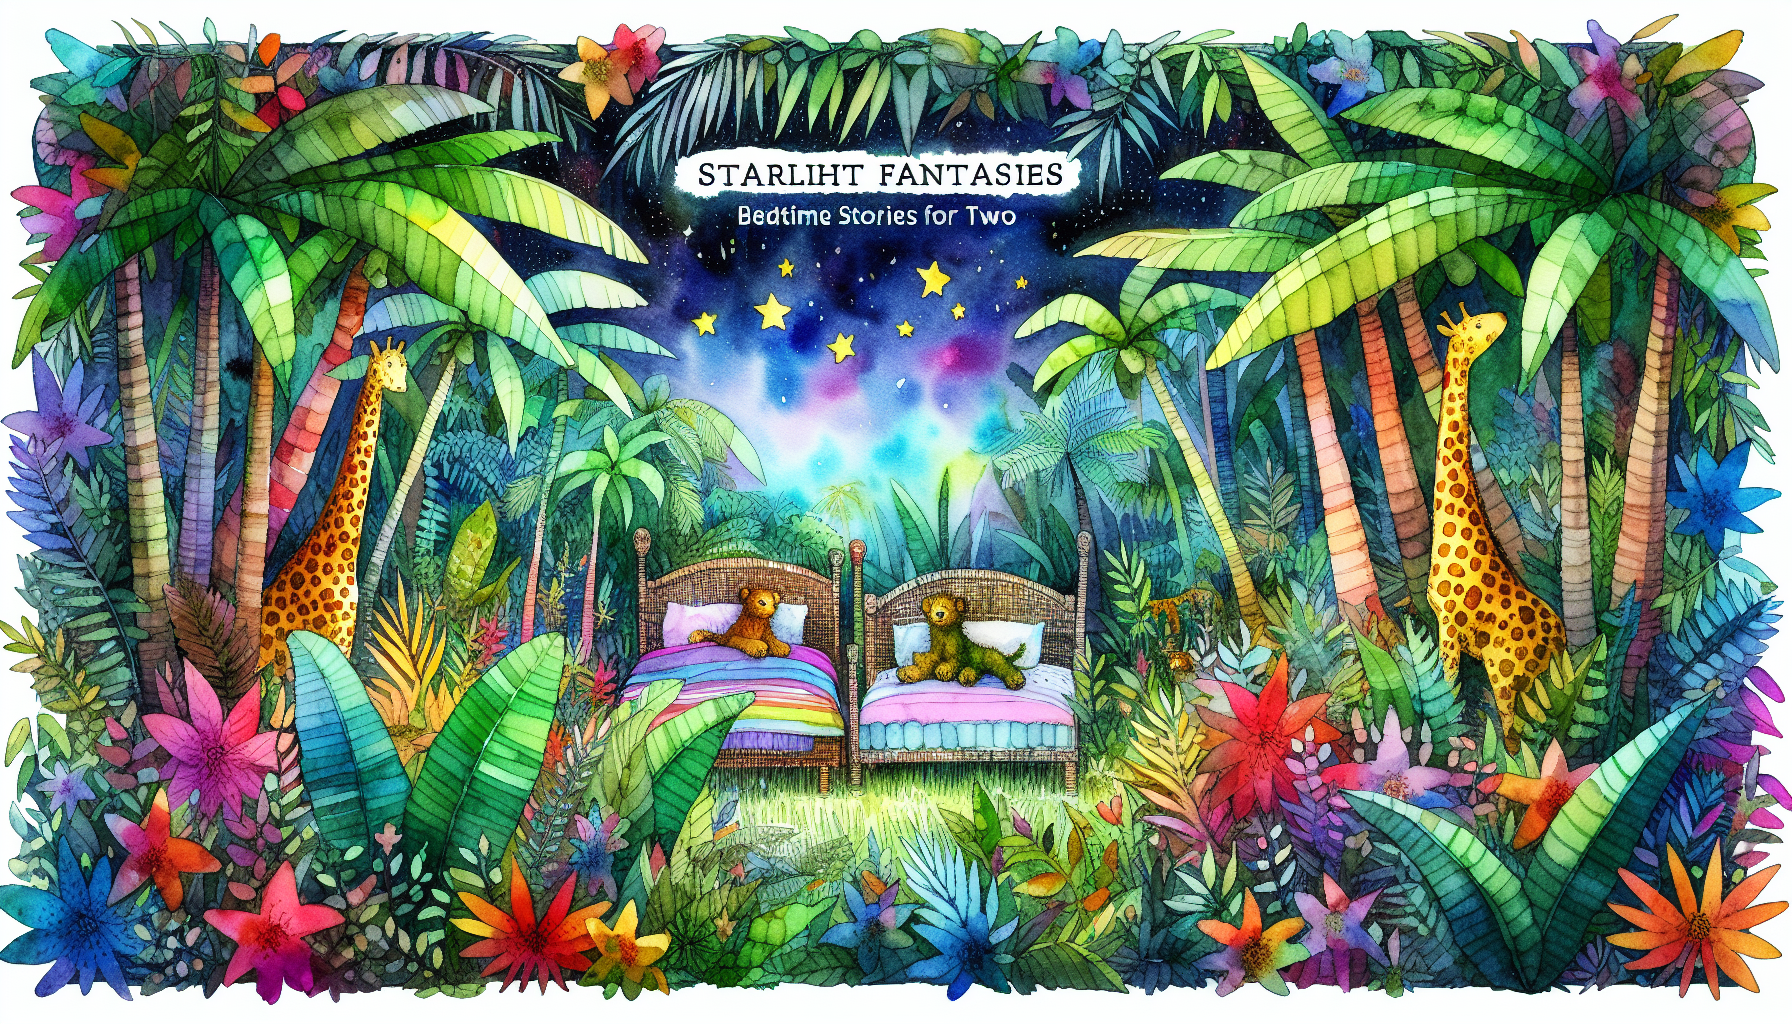 Starlit Fantasies Bedtime Stories for Two